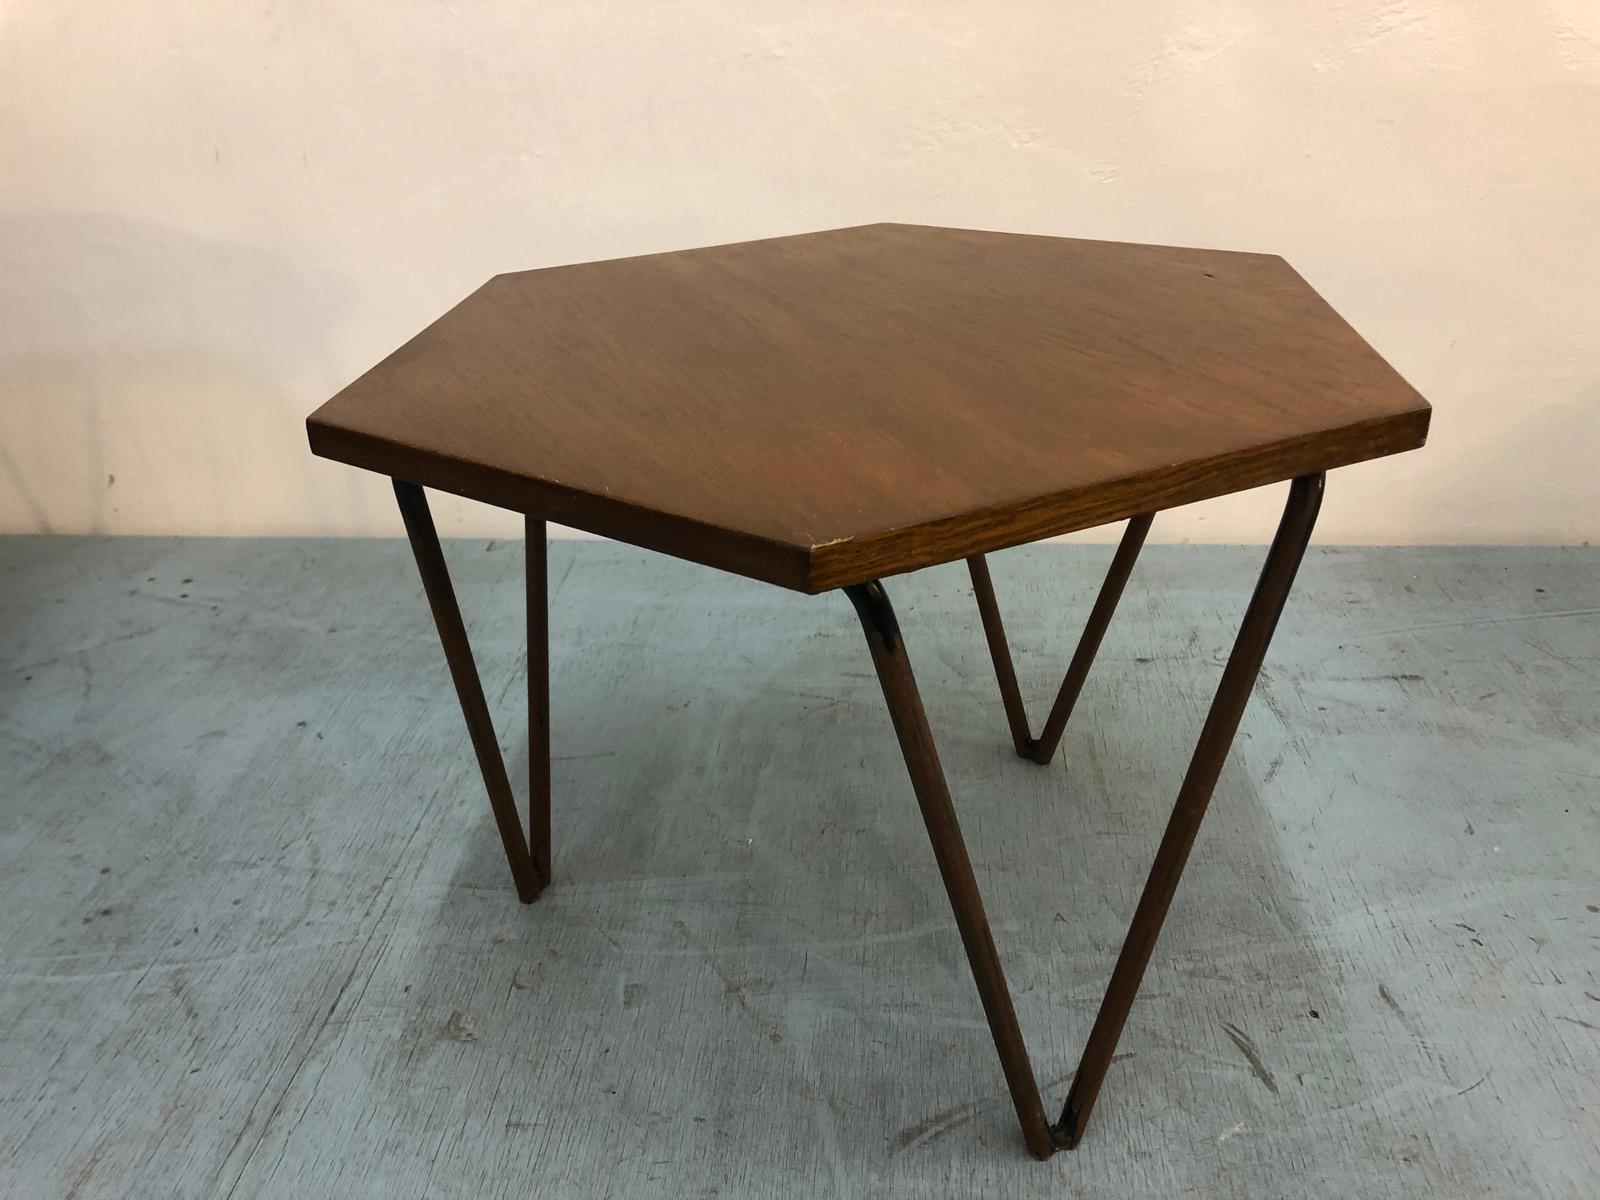 Set of Three Low Hexagonal Coffee Tables by Giò Ponti for Isa Bergamo, Italy 50s For Sale 8